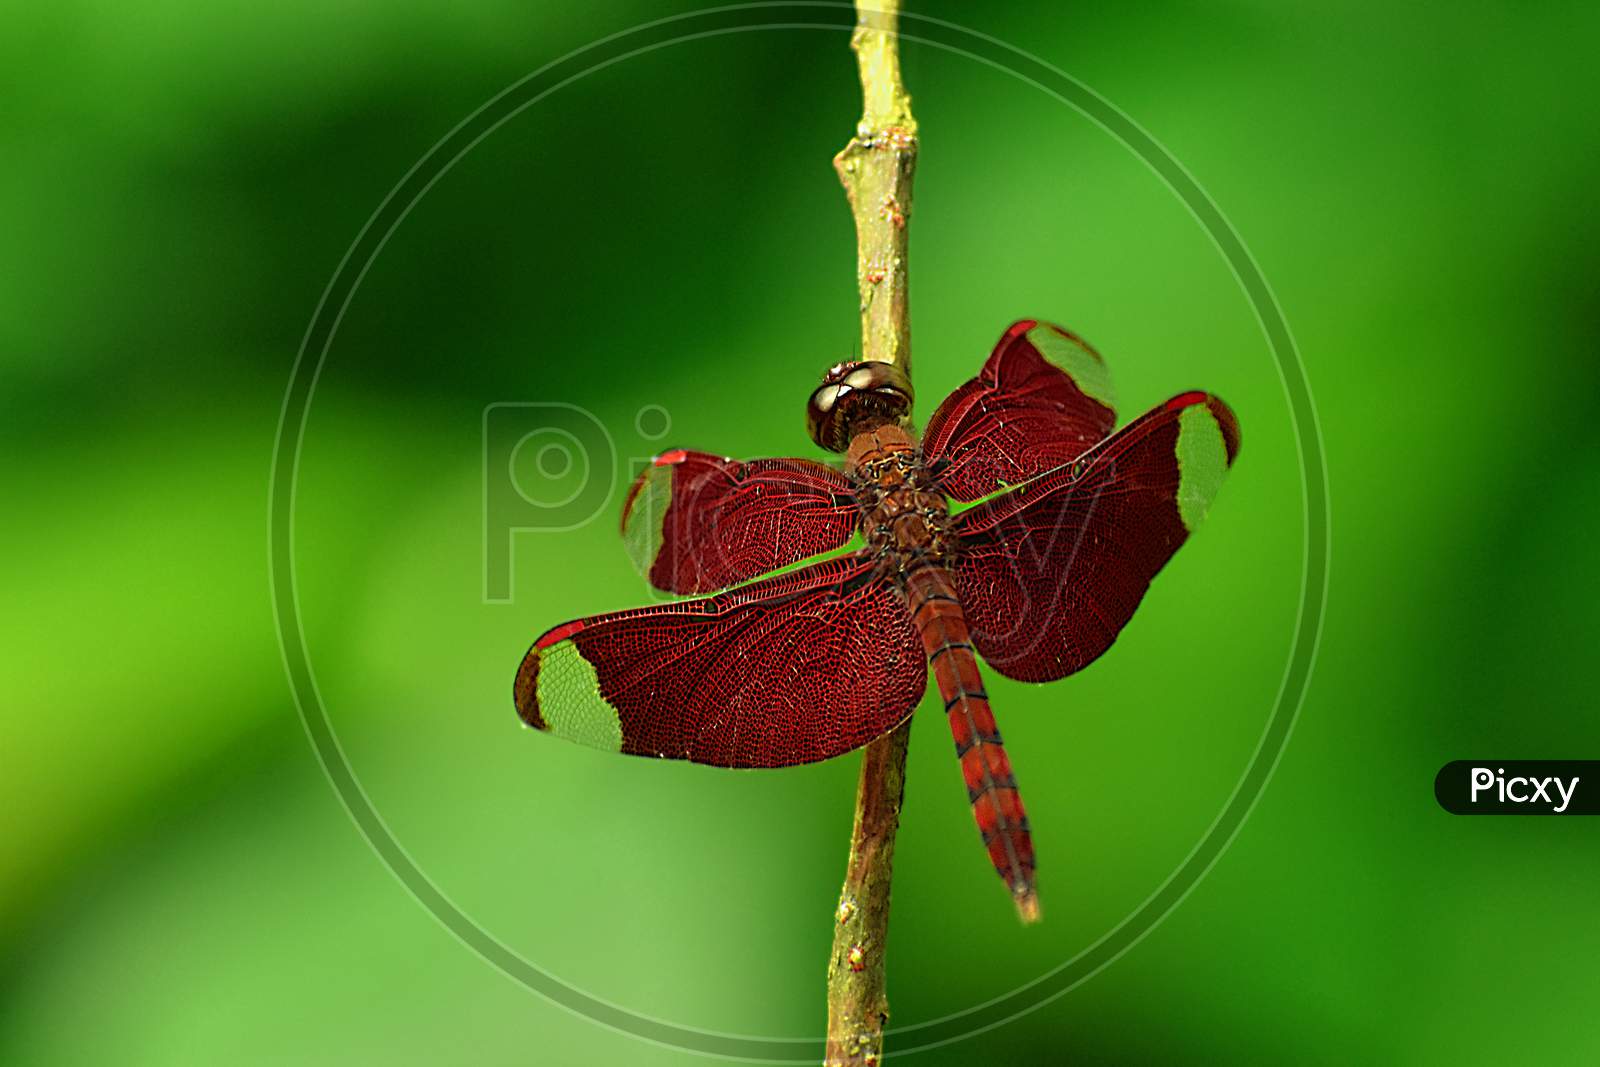 Red dragonfly in smooth green background